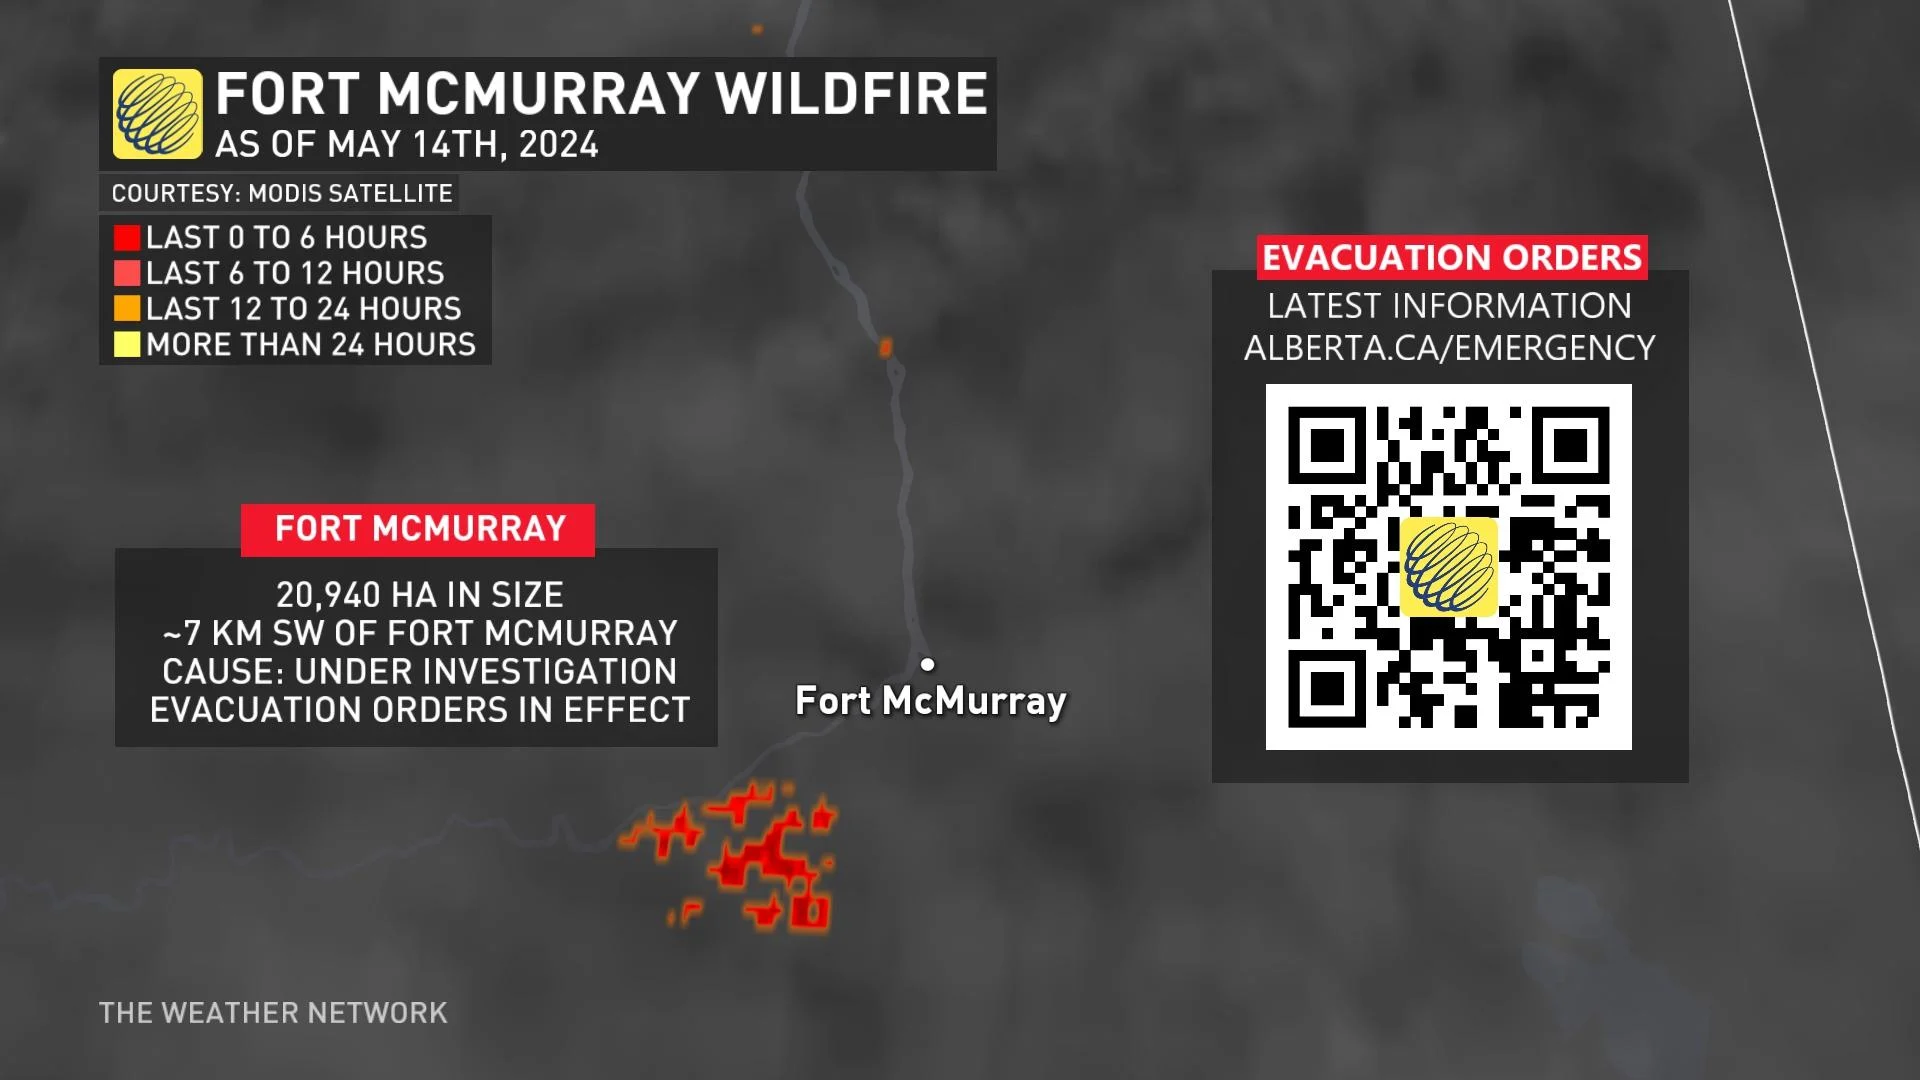 May 15: Fort McMurray, Alberta wildfire update (The Weather Network)